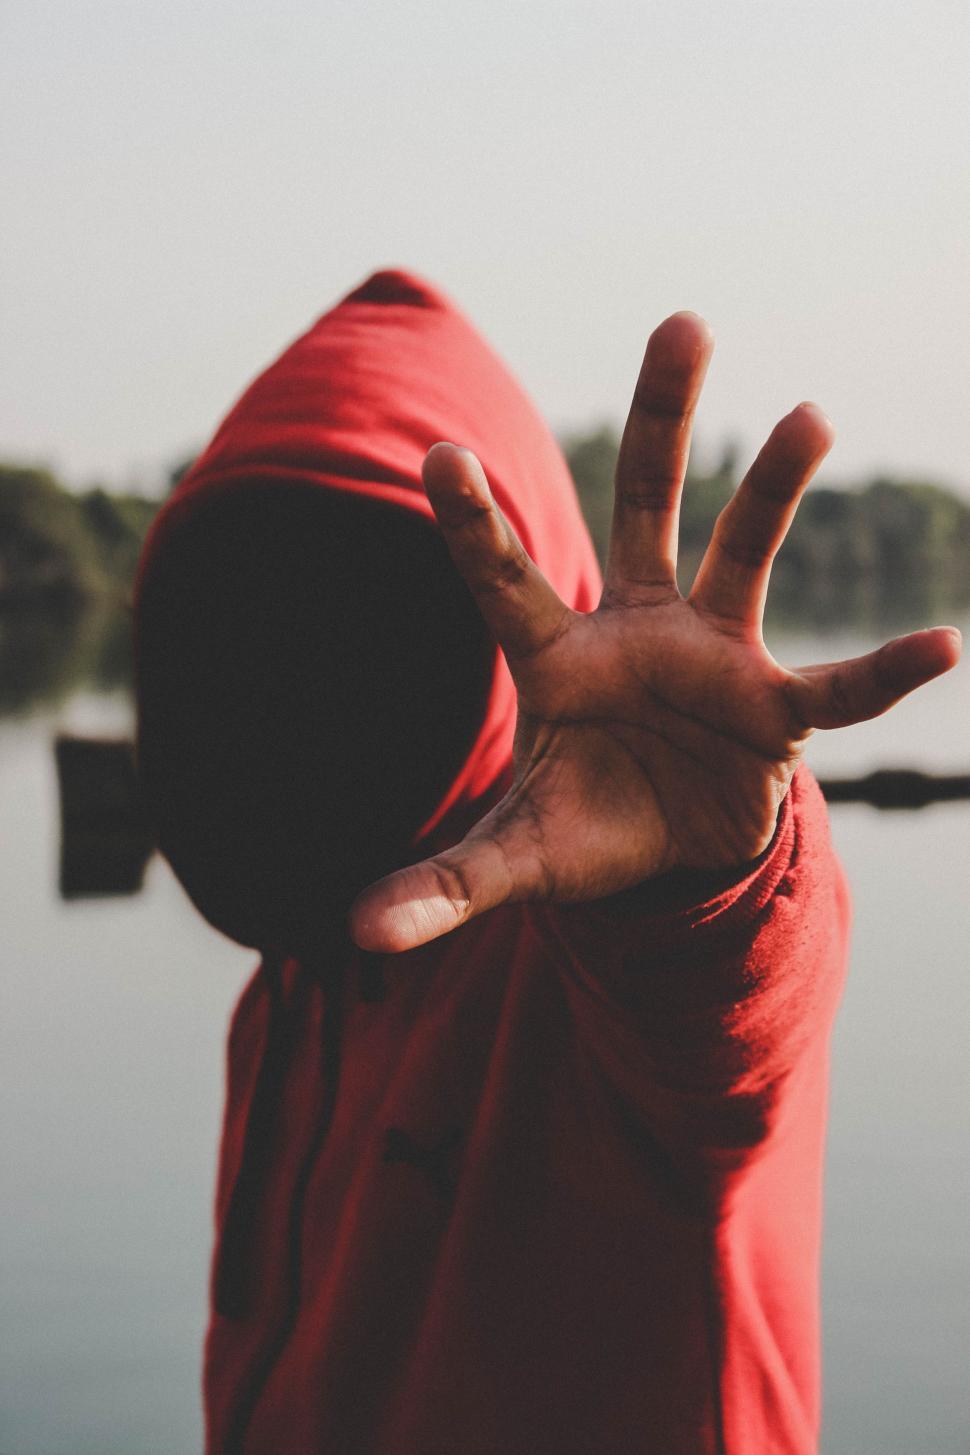 Free Image of Person in Red Hoodie Making Hand Gesture 